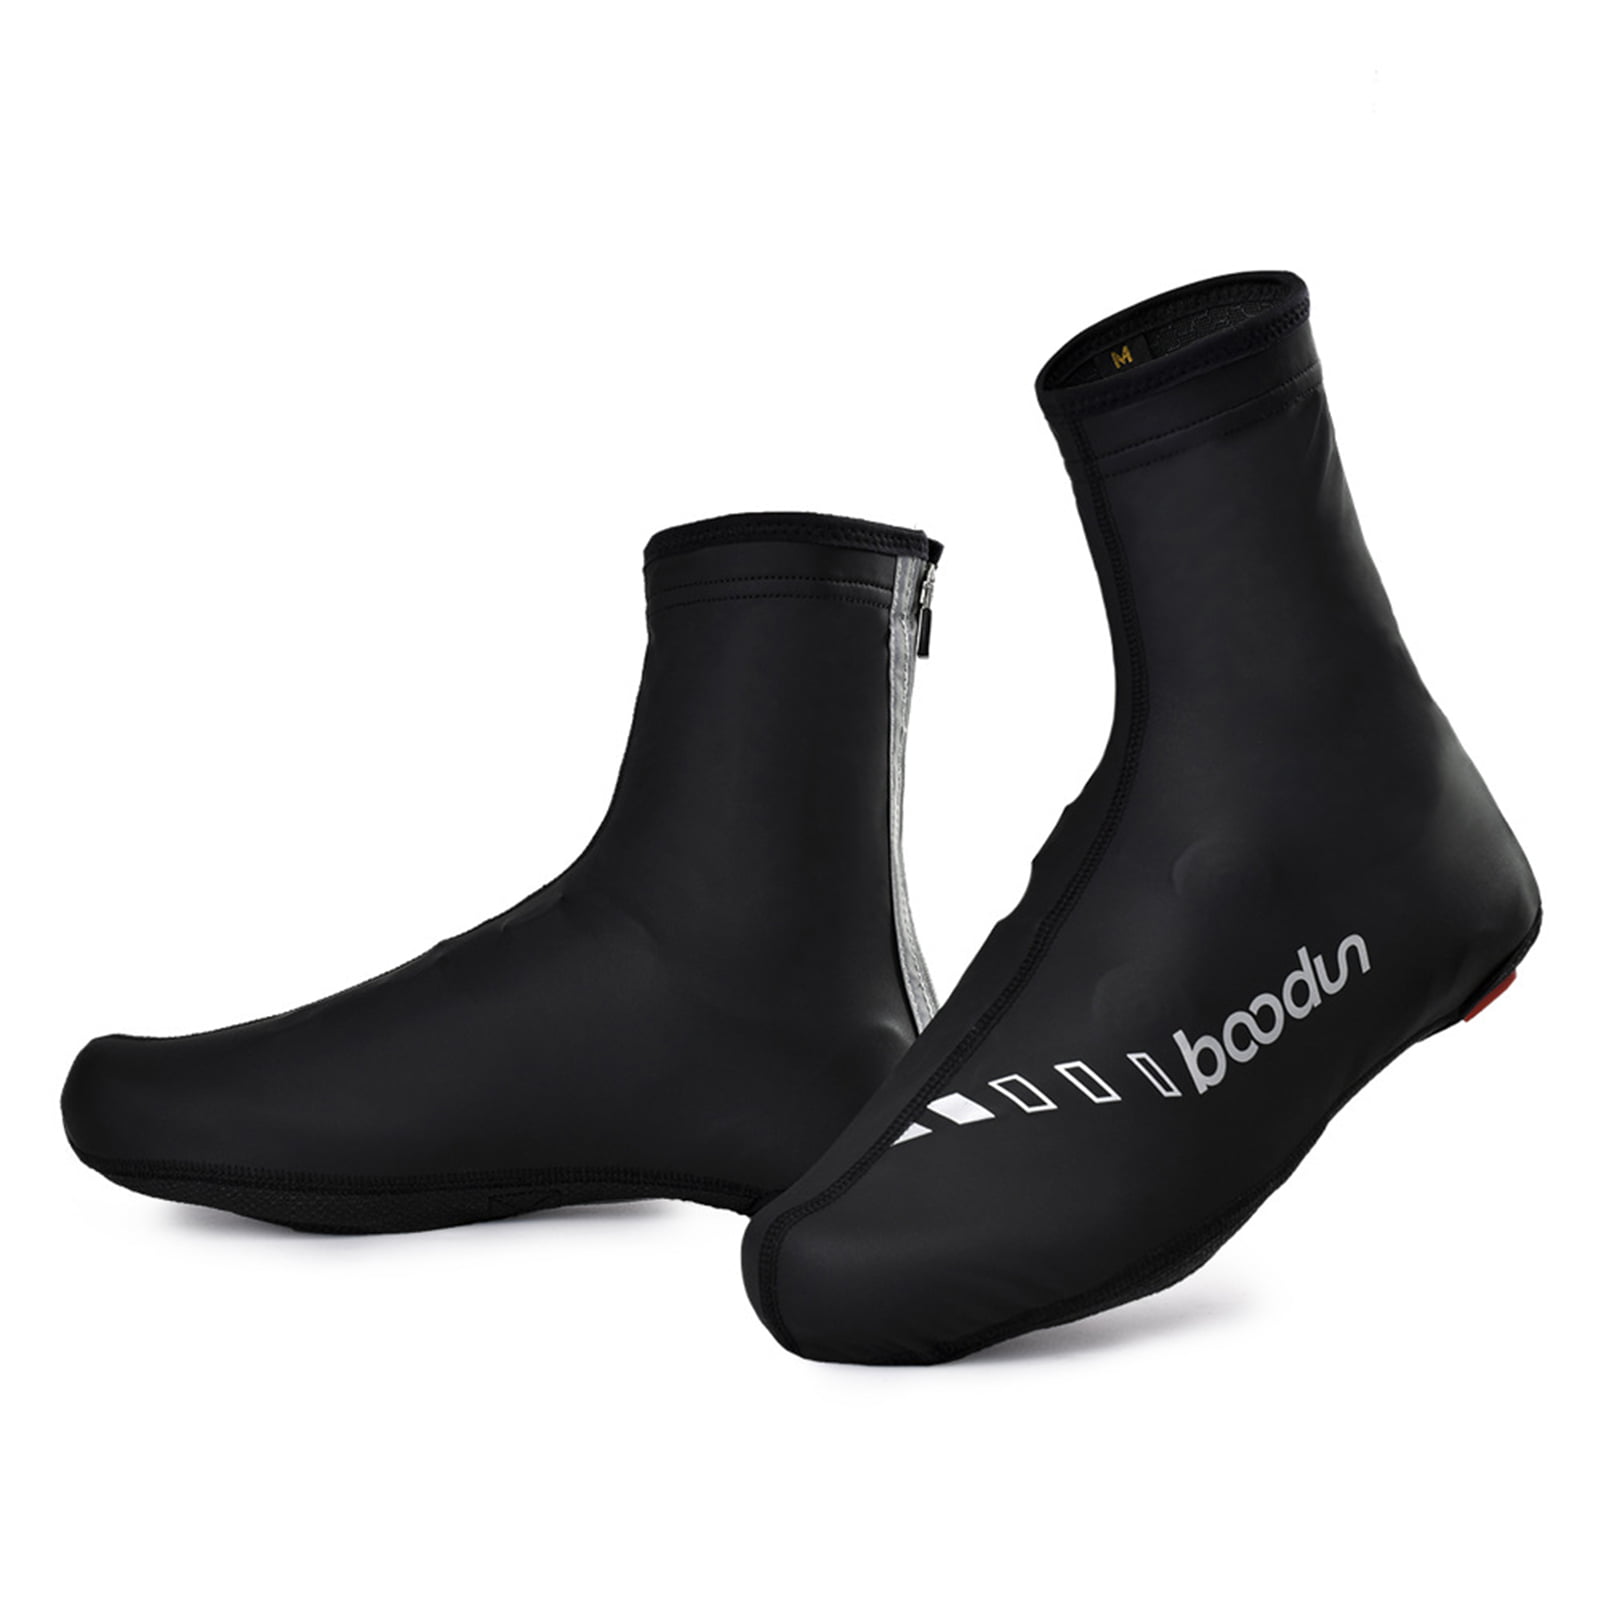 Waterproof Cycling Rain Snow Boots Covers Bike Shoe Covers Overshoes with Strap